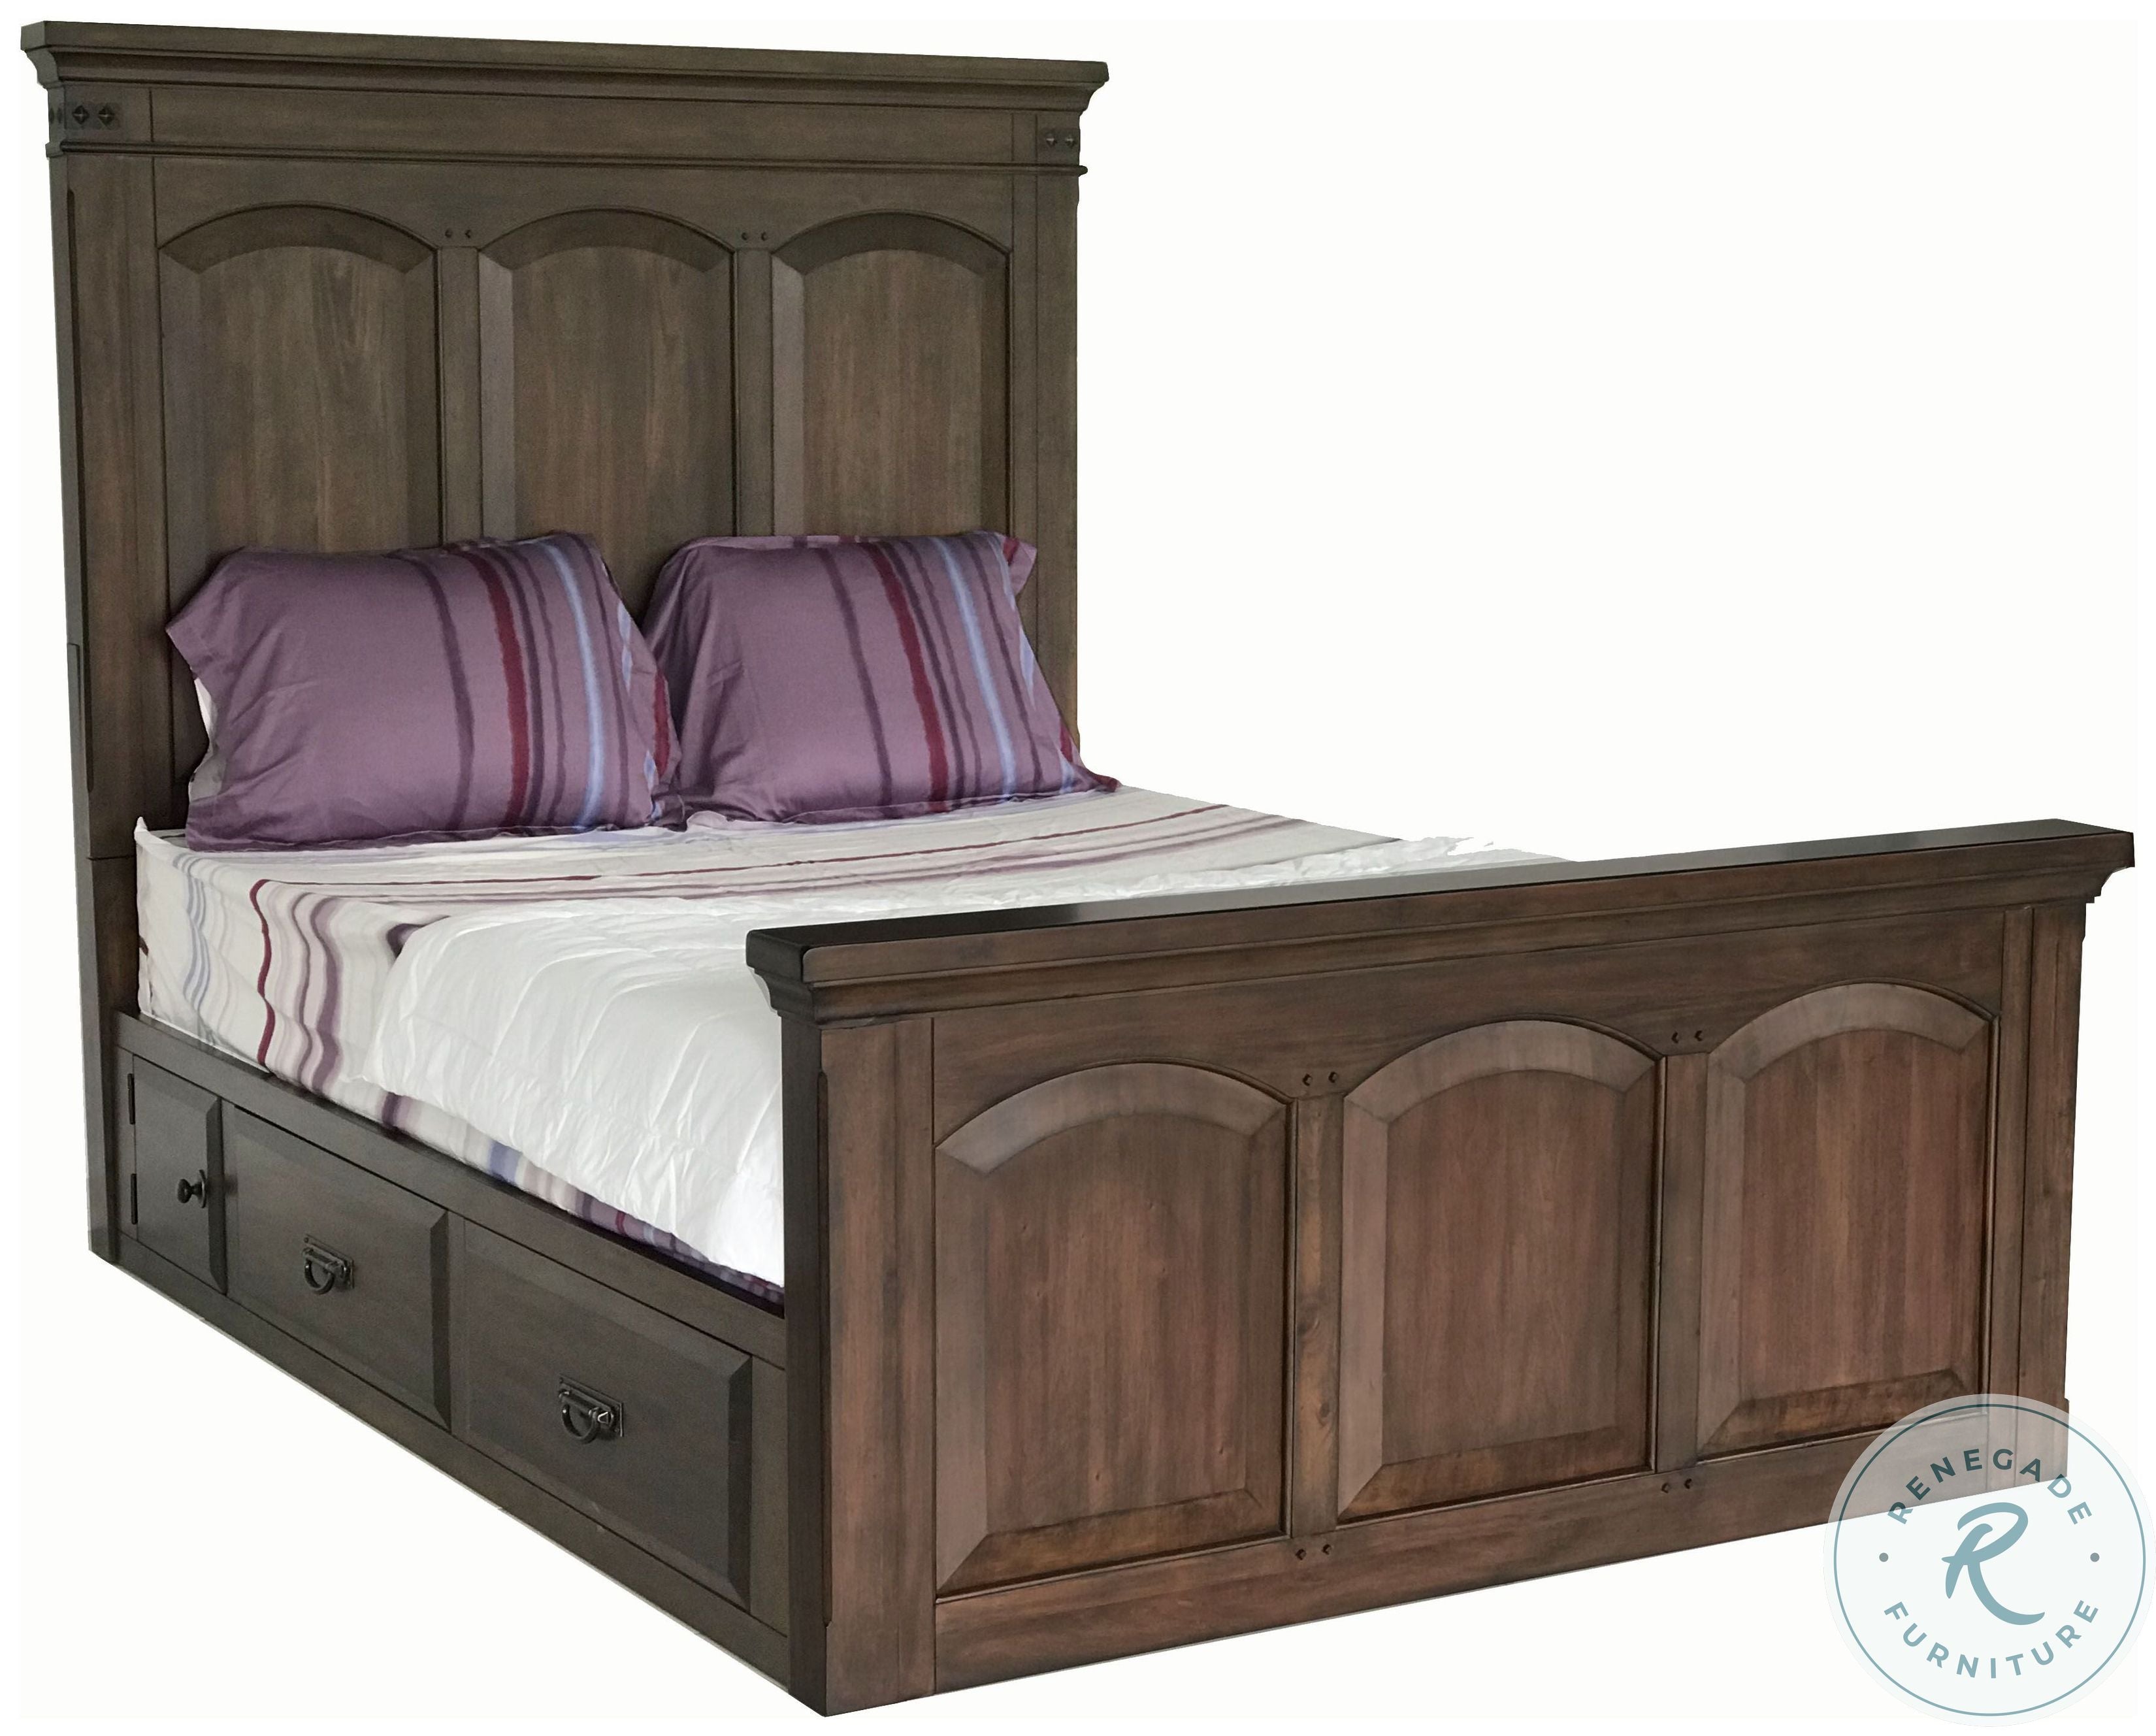 Aspen Village Lightly Distressed Toasted Mahogany Queen Storage Panel Bed by Avalon Furniture